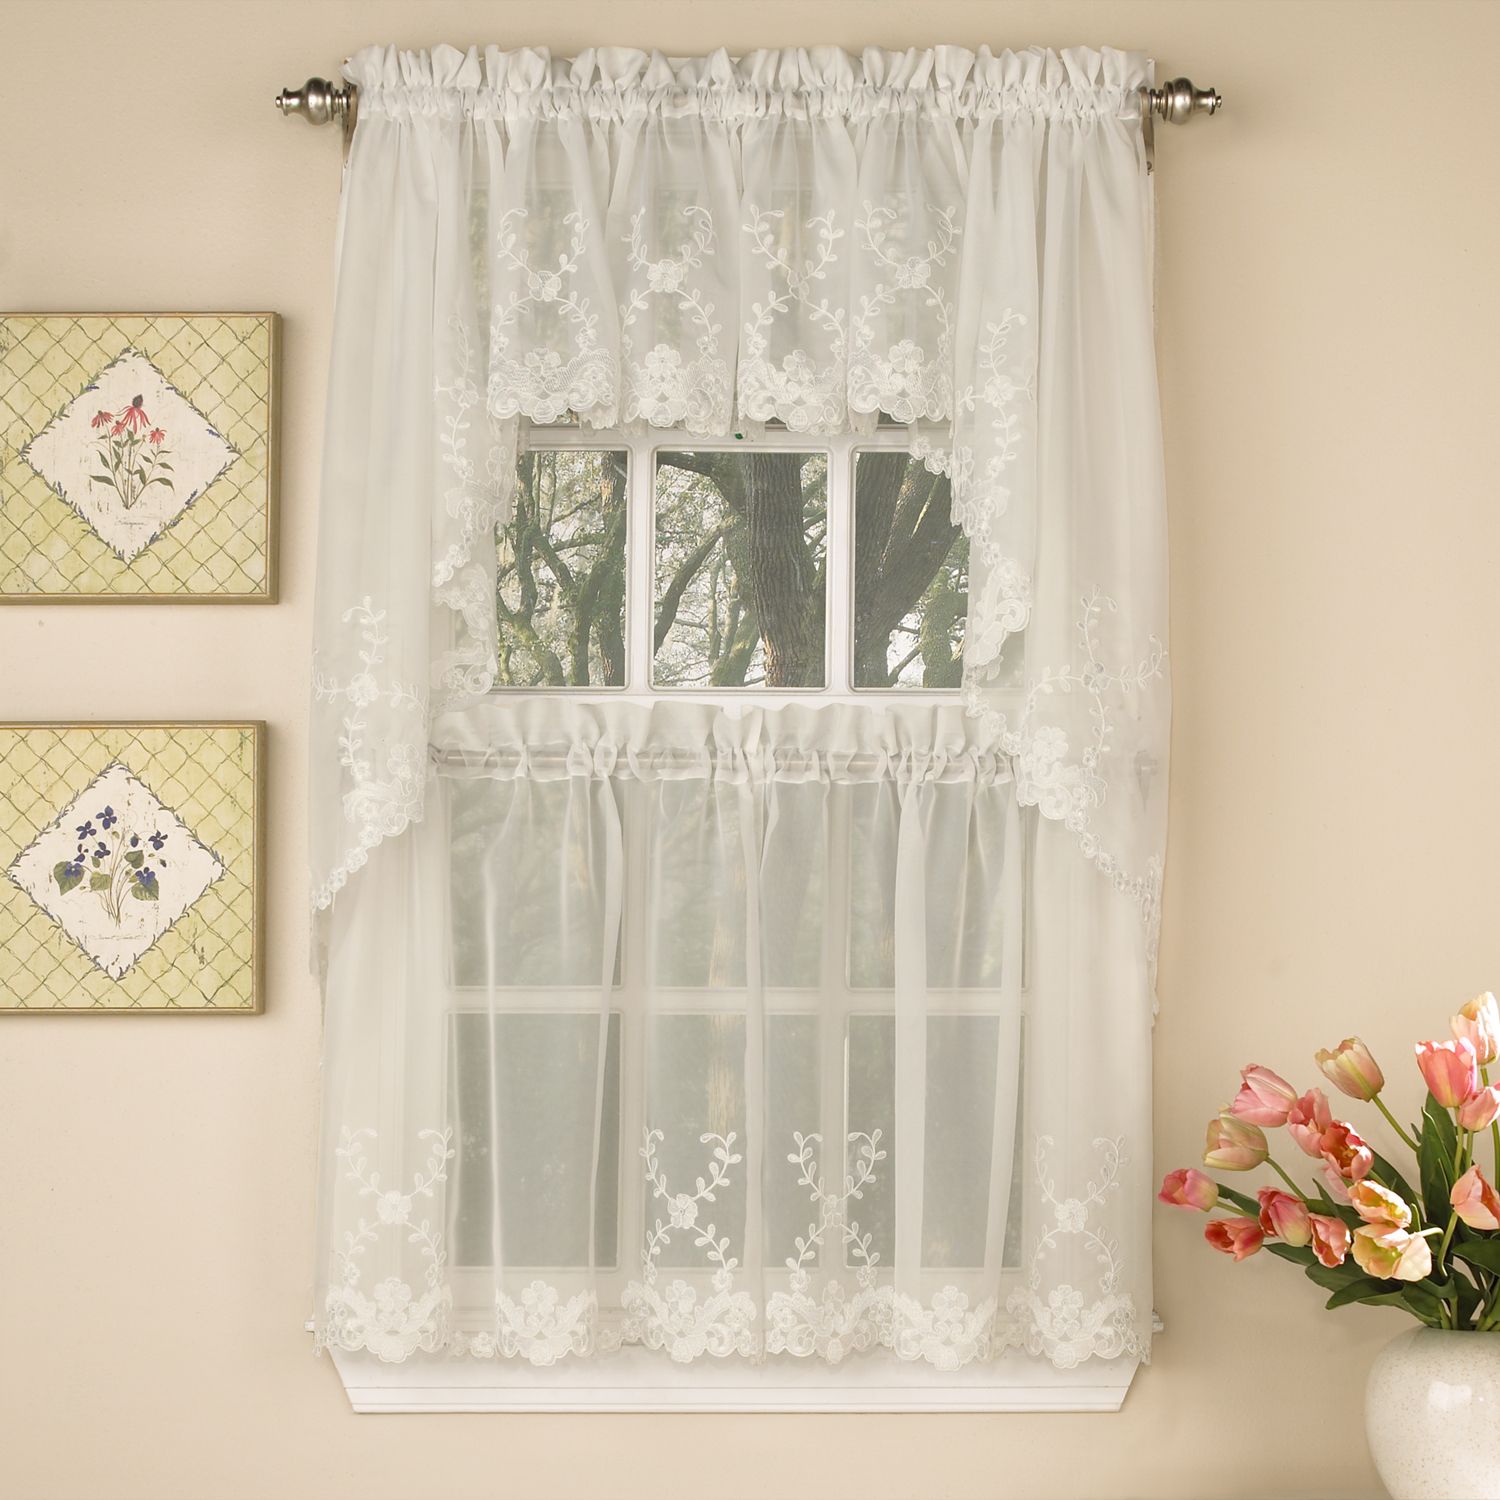 Details About Laurel Leaf Sheer Voile Embroidered Ivory Kitchen Curtains  Tier, Valance Or Swag Inside Floral Lace Rod Pocket Kitchen Curtain Valance And Tiers Sets (View 6 of 20)